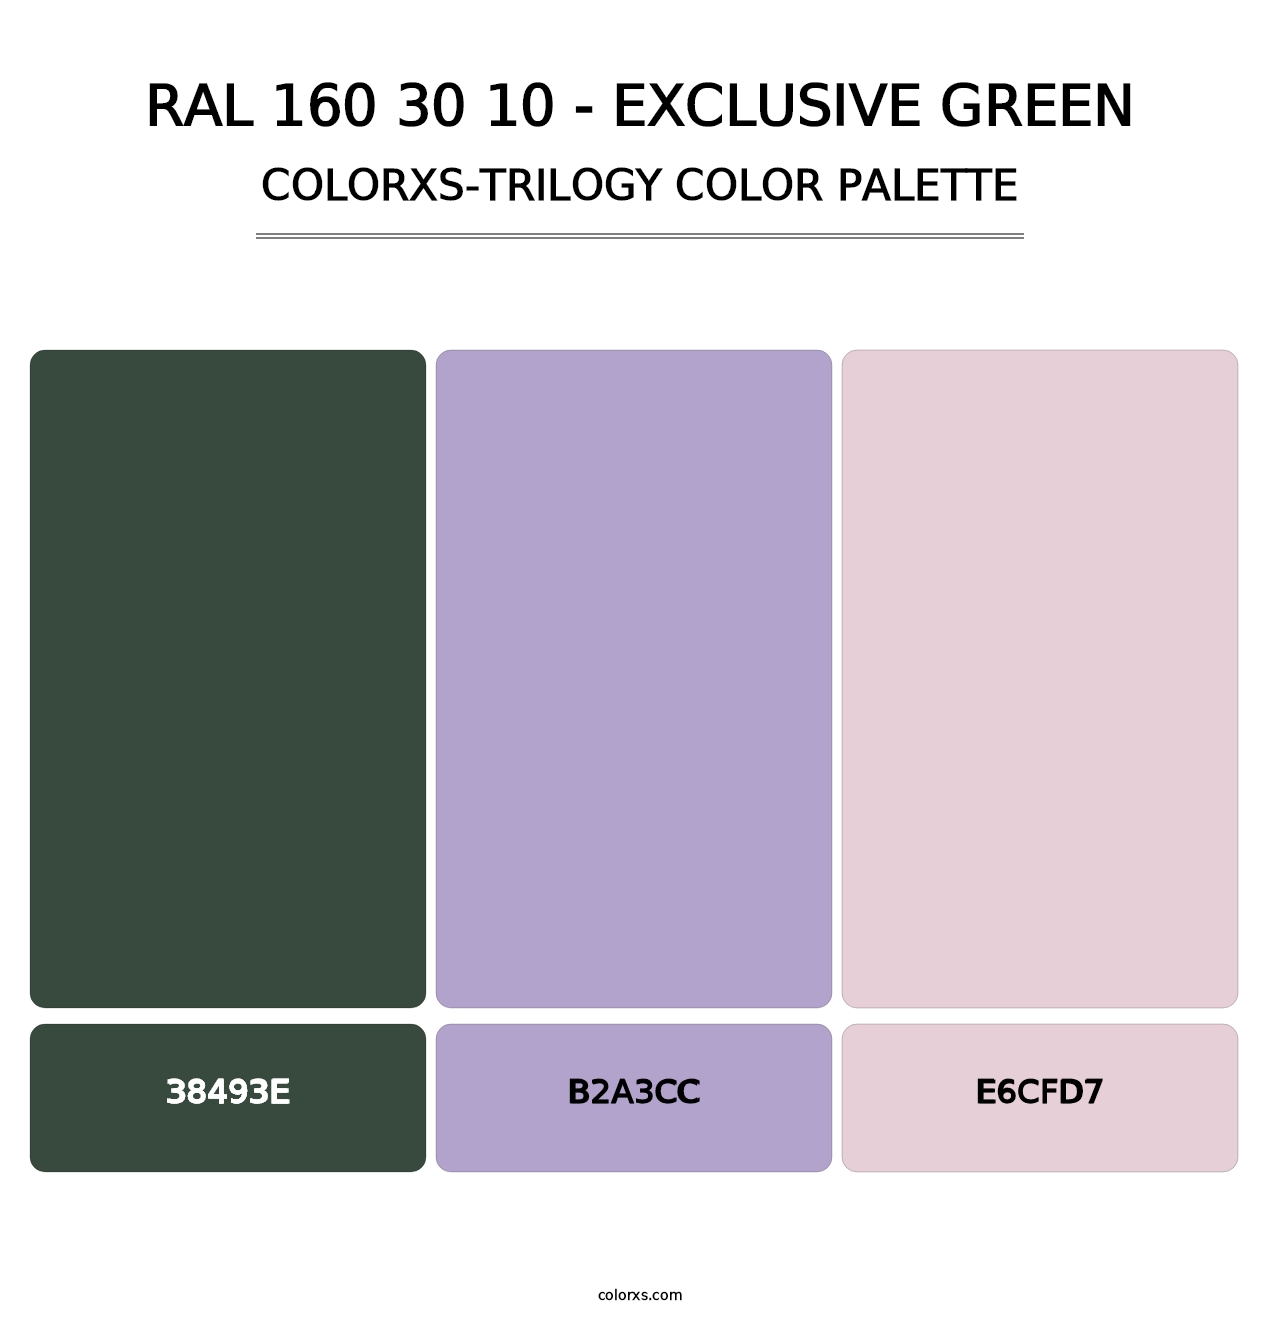 RAL 160 30 10 - Exclusive Green - Colorxs Trilogy Palette